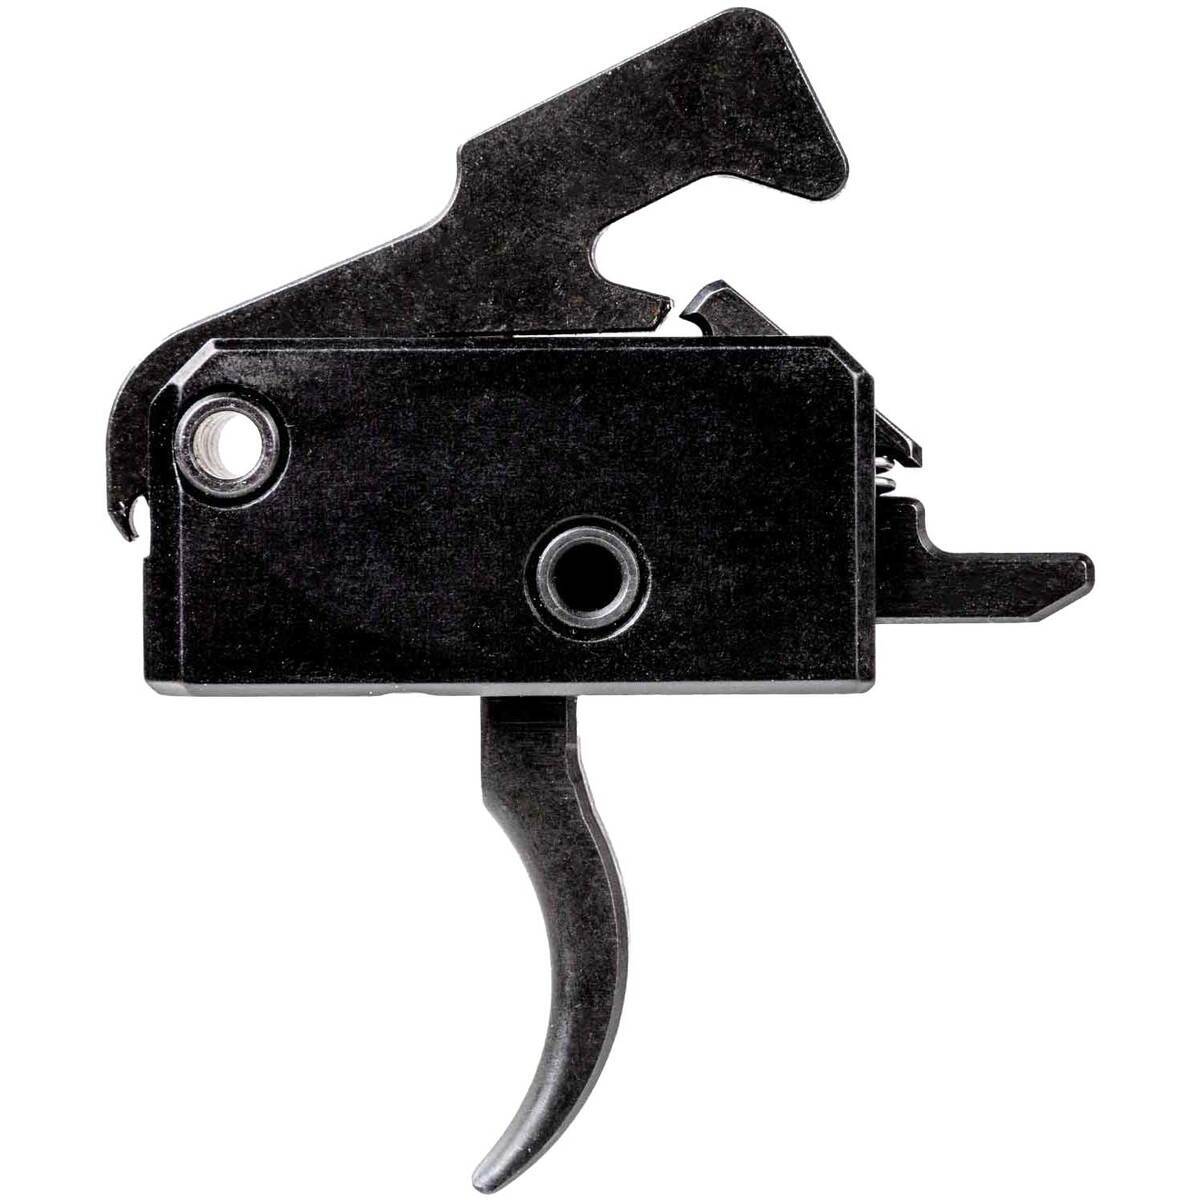 TAPCO AR-15 Single Stage Rifle Trigger - Curved | Sportsman's Warehouse